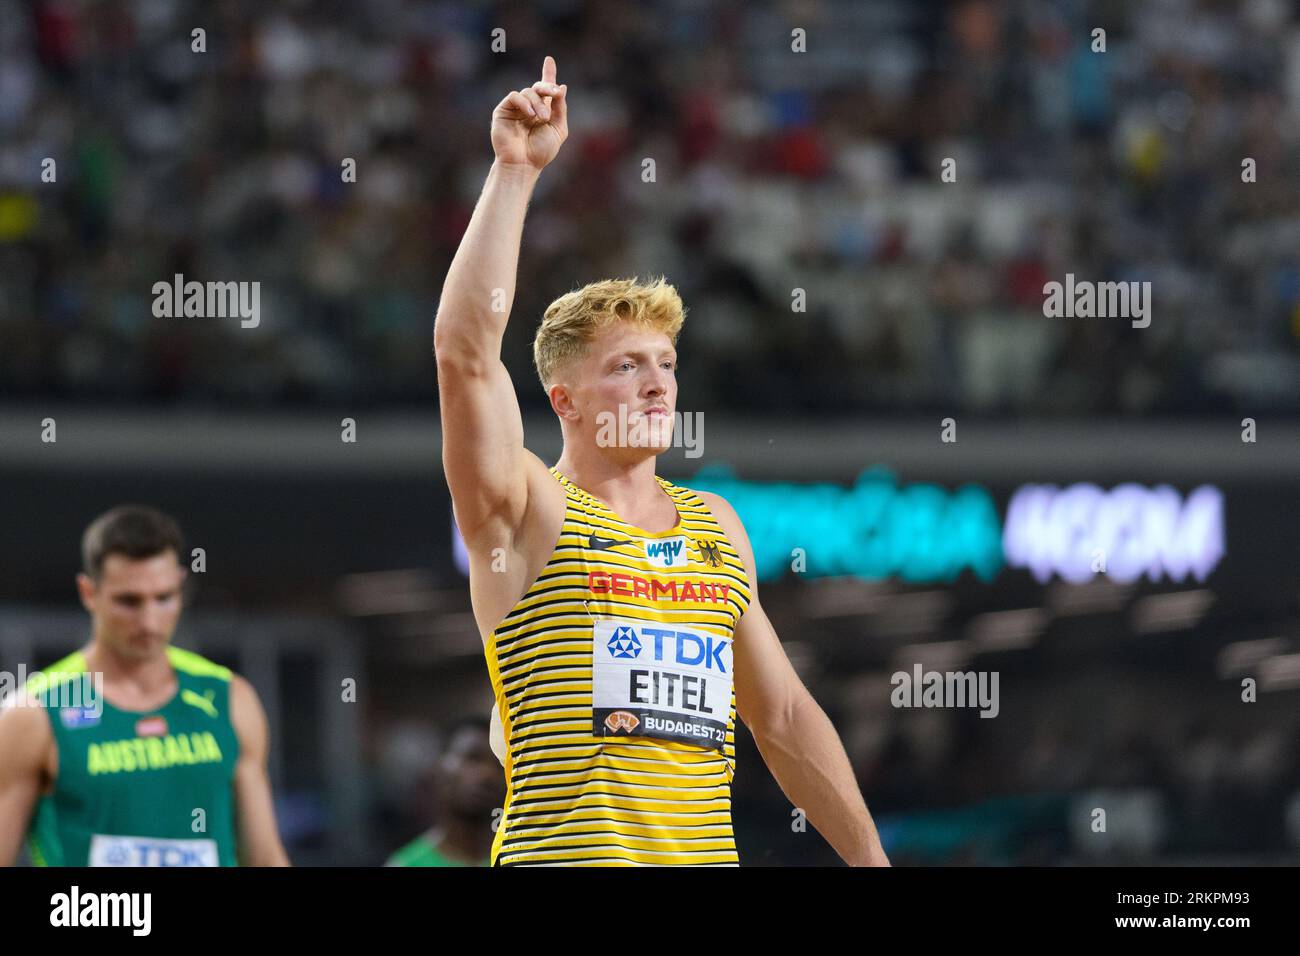 Manuel Eitel (Germany) before the decathlon 400 metres during the world athletics championships 2023 at the National Athletics Centre, in Budapest, Hungary